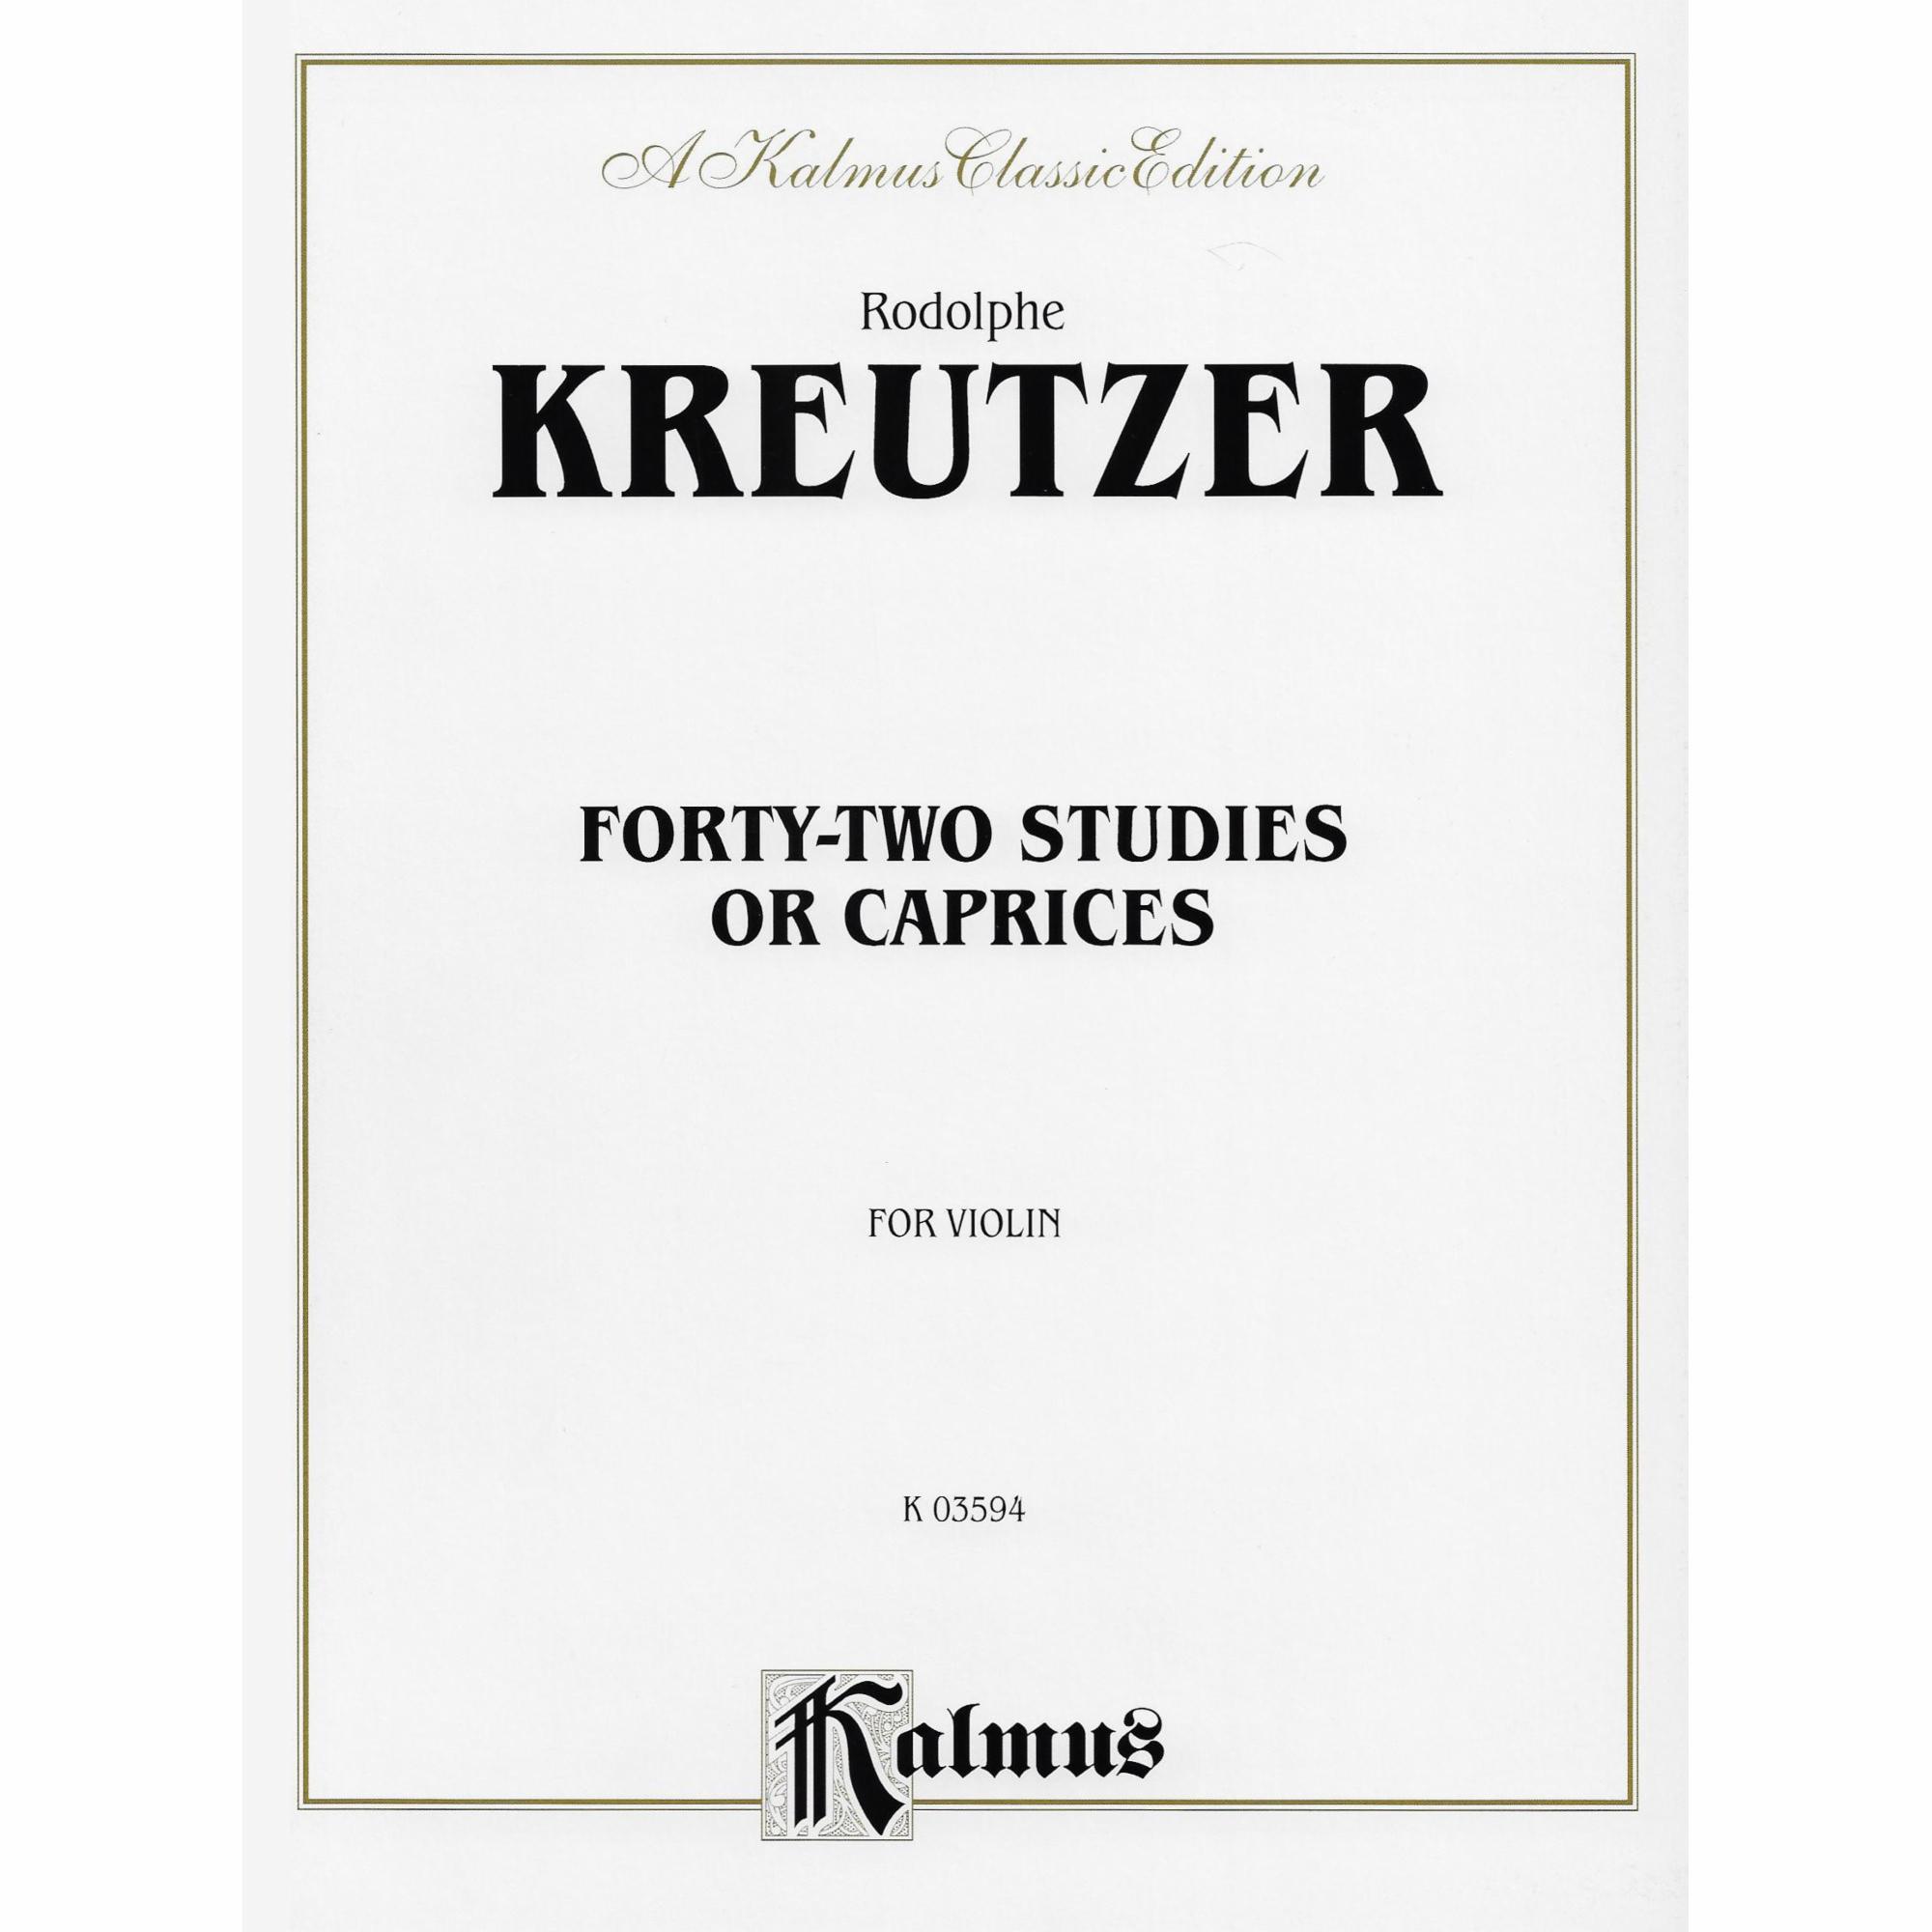 Kreutzer -- Forty-Two Studies or Caprices for Violin